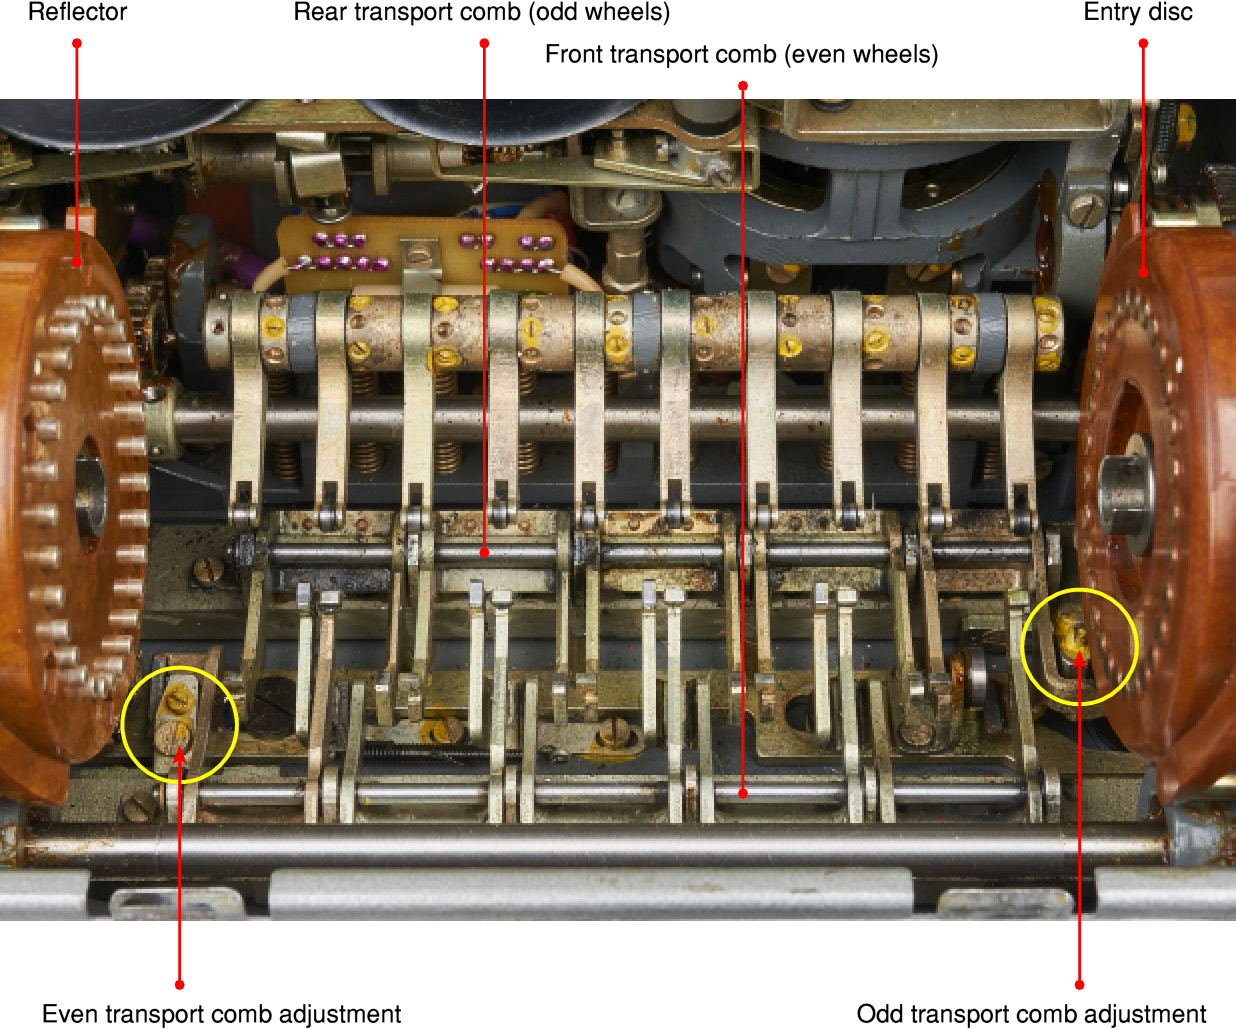 Location of the adjustment screws. Click for a better view.